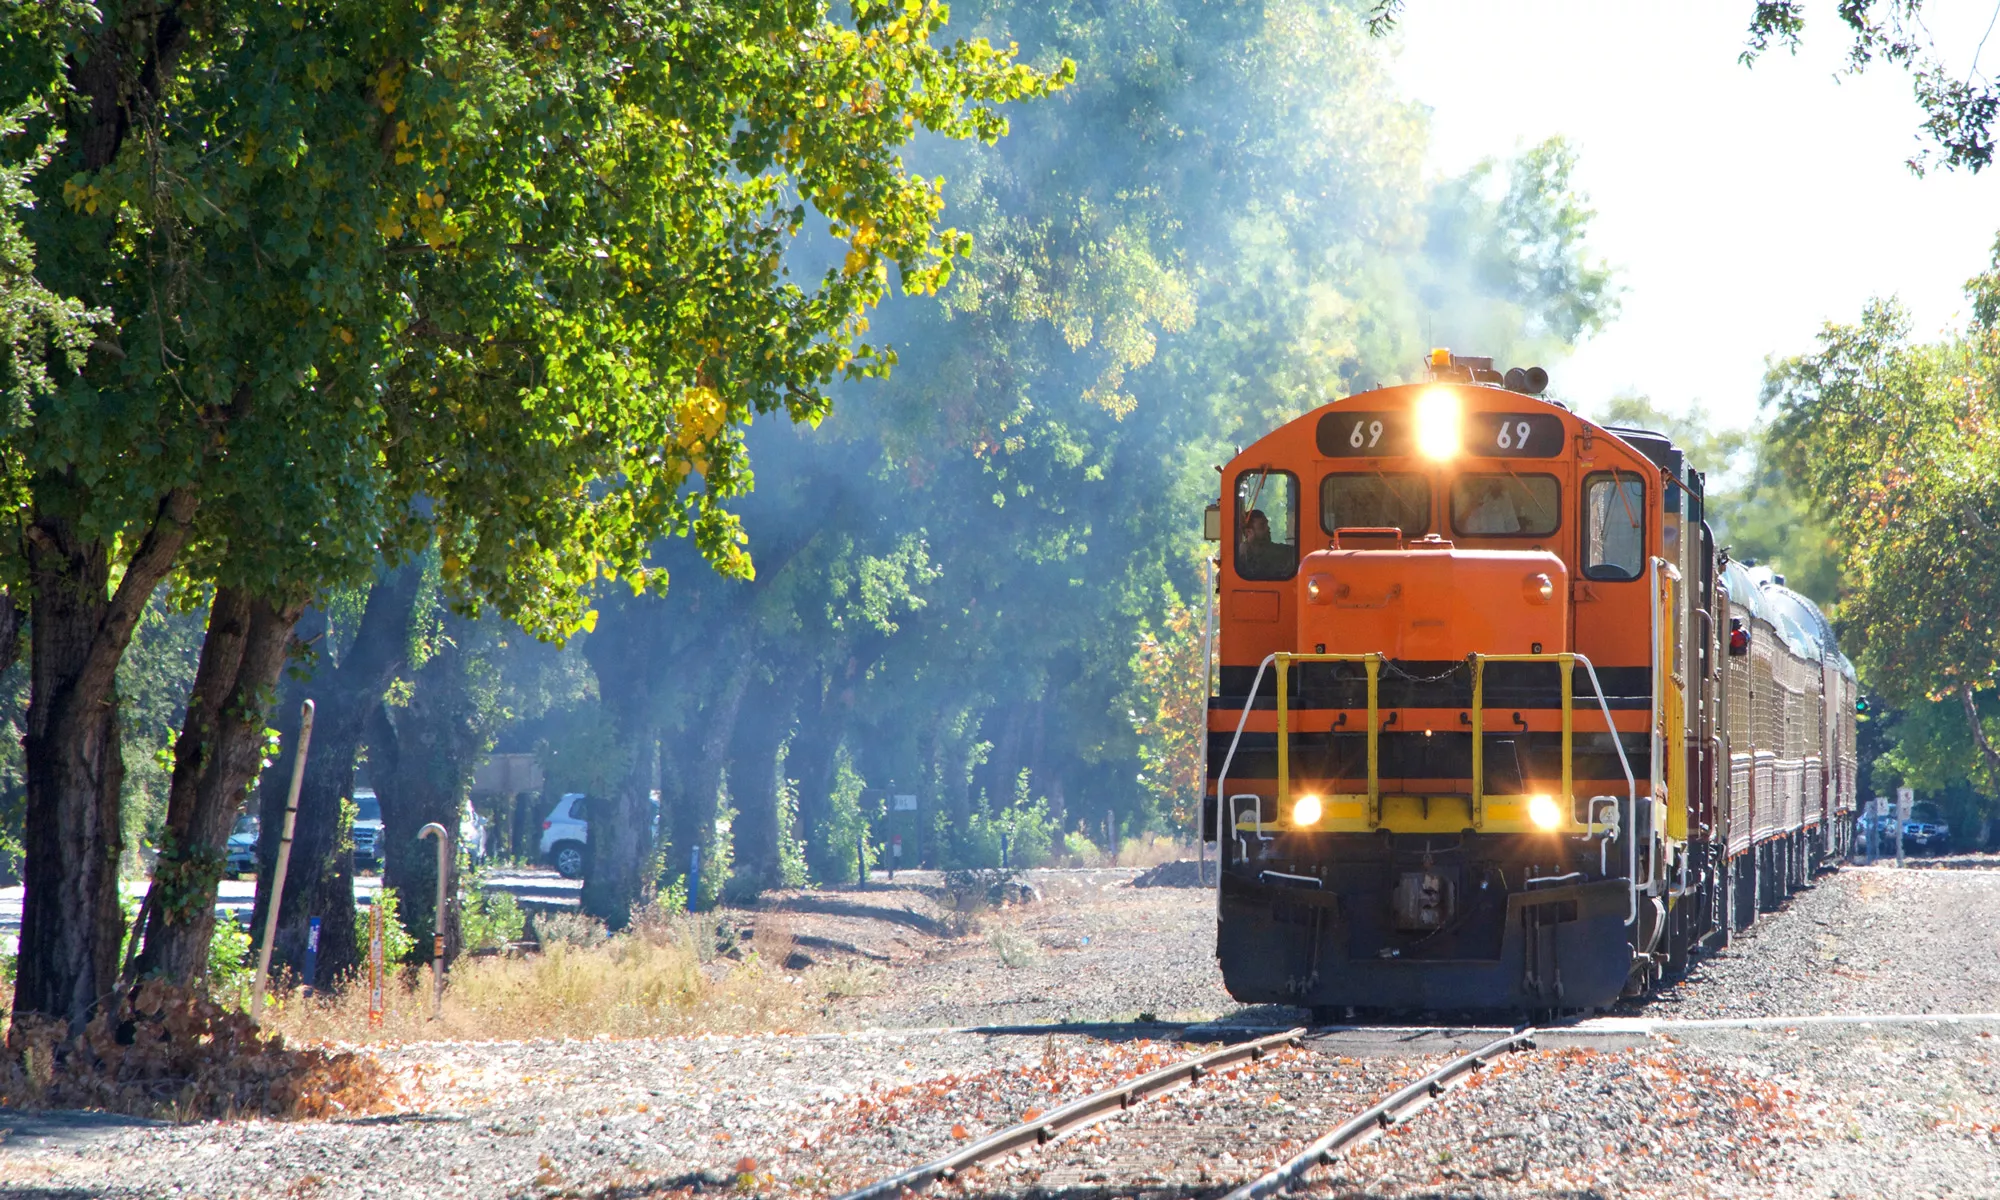 18 of the Best Scenic Train Rides in the US